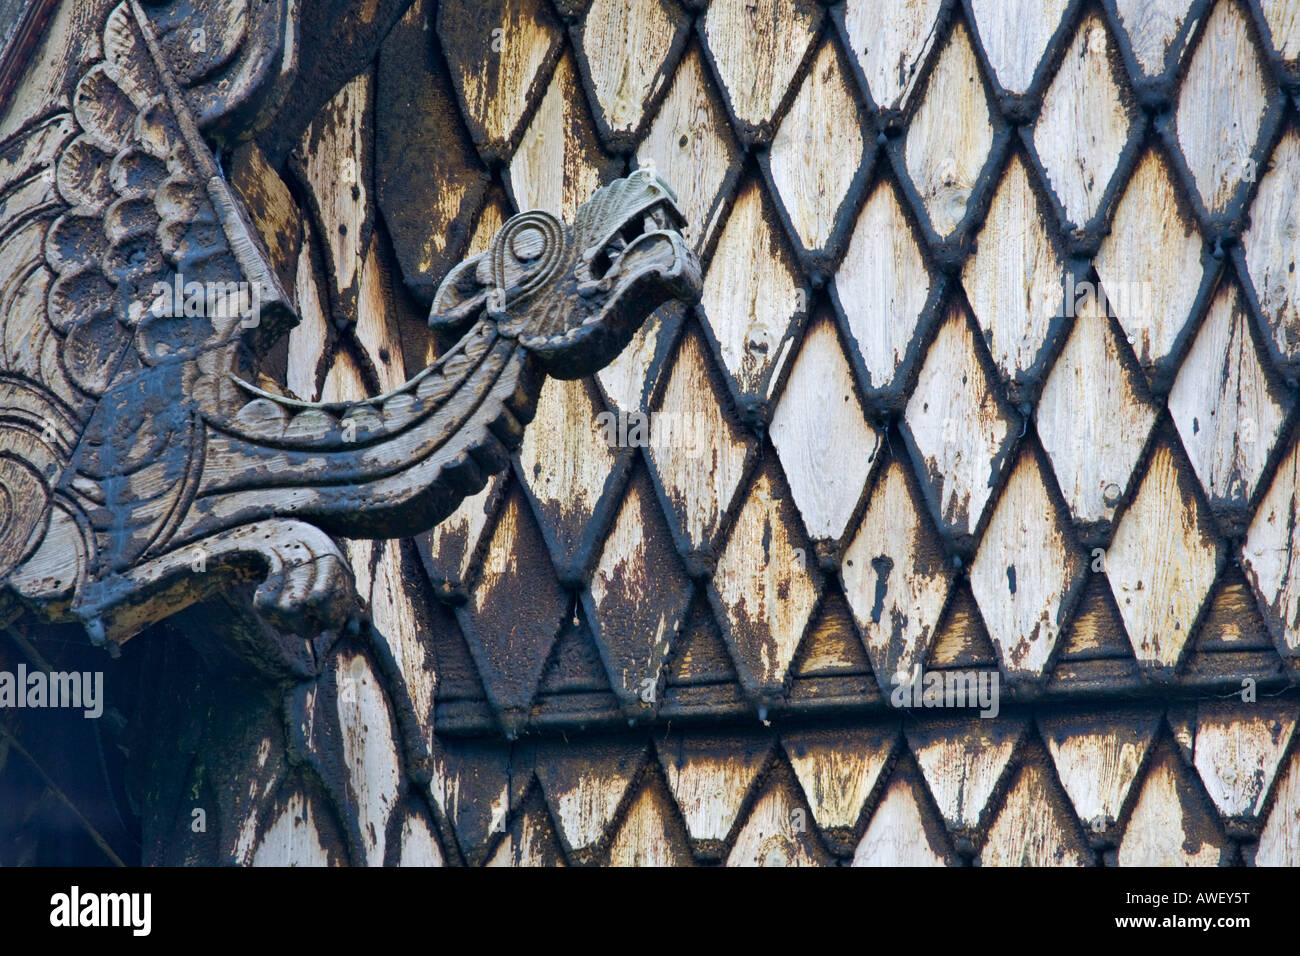 Dragon and shingles at Hopperstad stave church (ca. 1130), Norway, Scandinavia, Europe Stock Photo